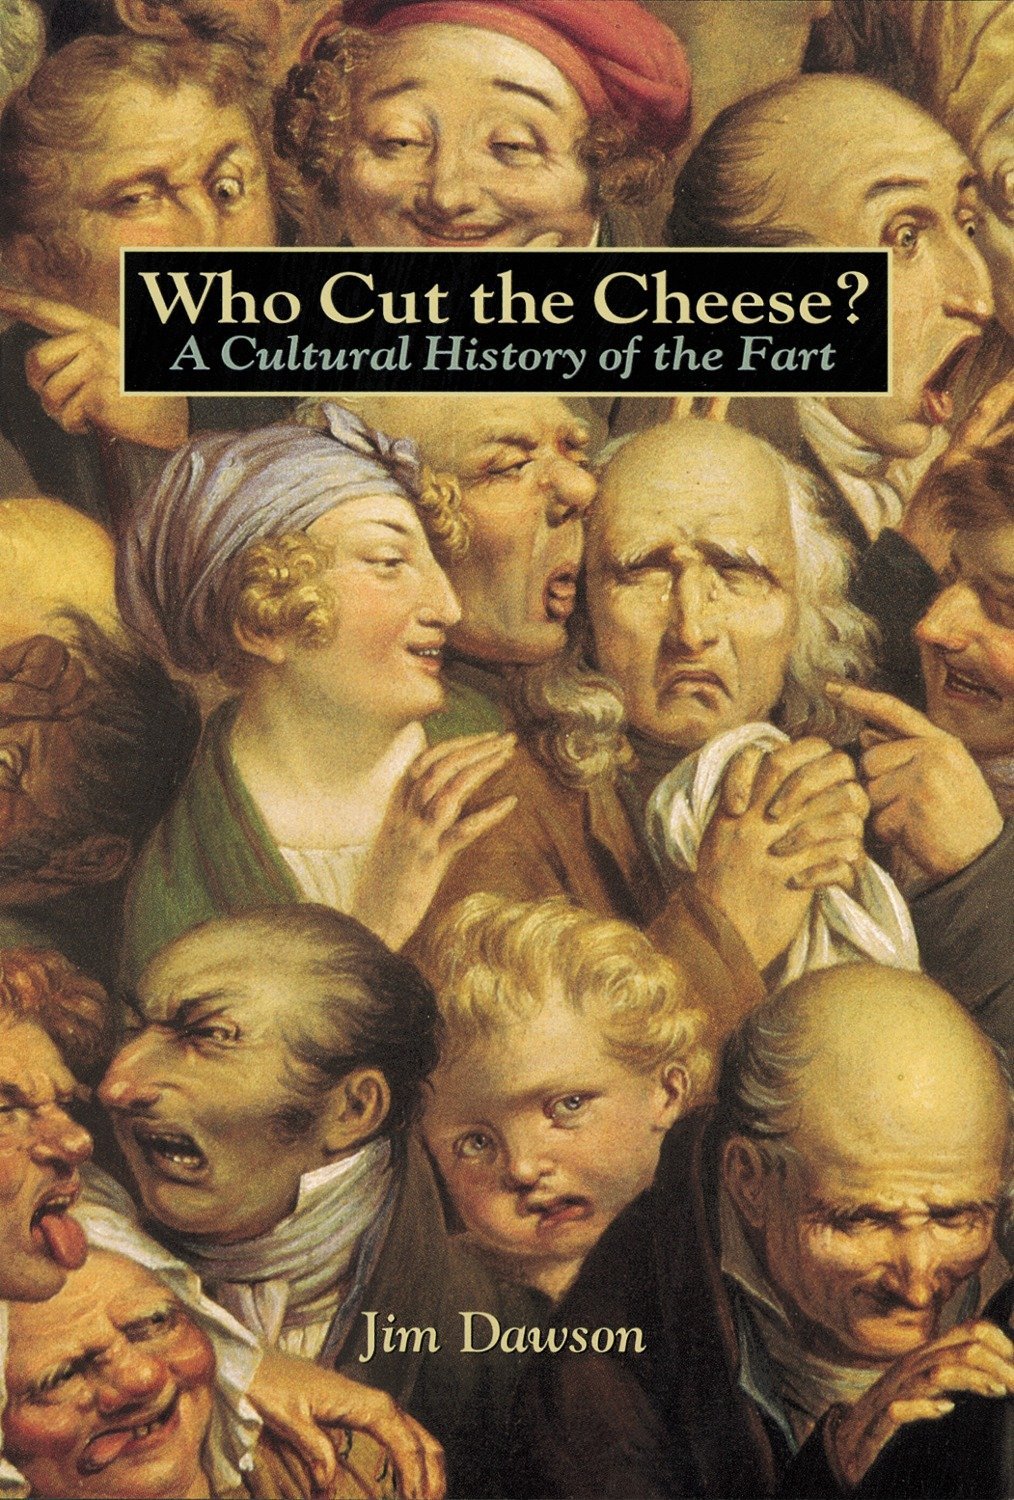 Who Cut the Cheese? A Cultural History of the Fart